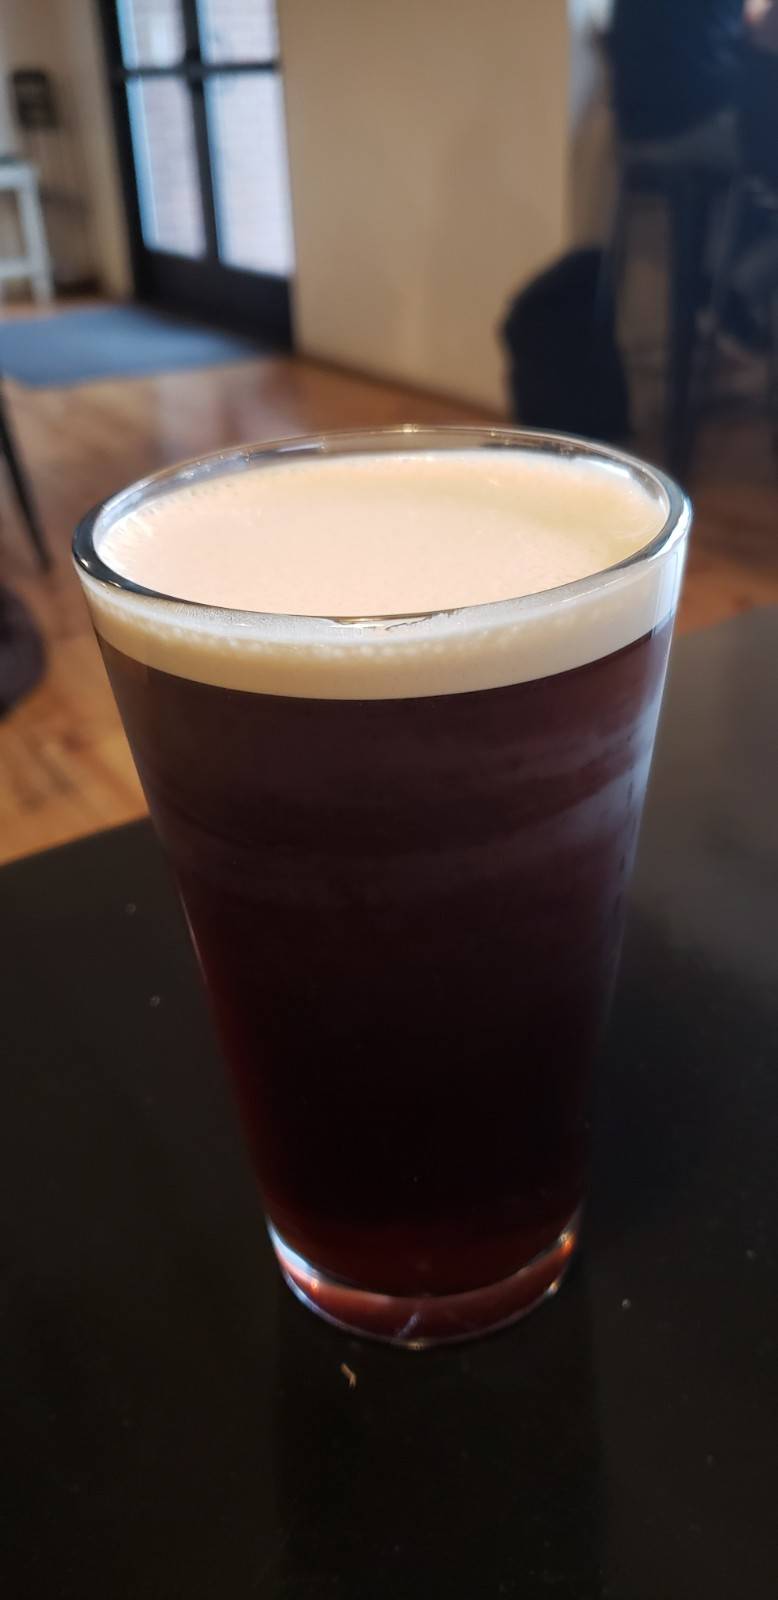 Nitro coffee from Cafeteria & Company. A cold coffee is served in a pint glass. It is a reddish brown color with a cream-colored foam on top. Photo by Elaine Sine. 